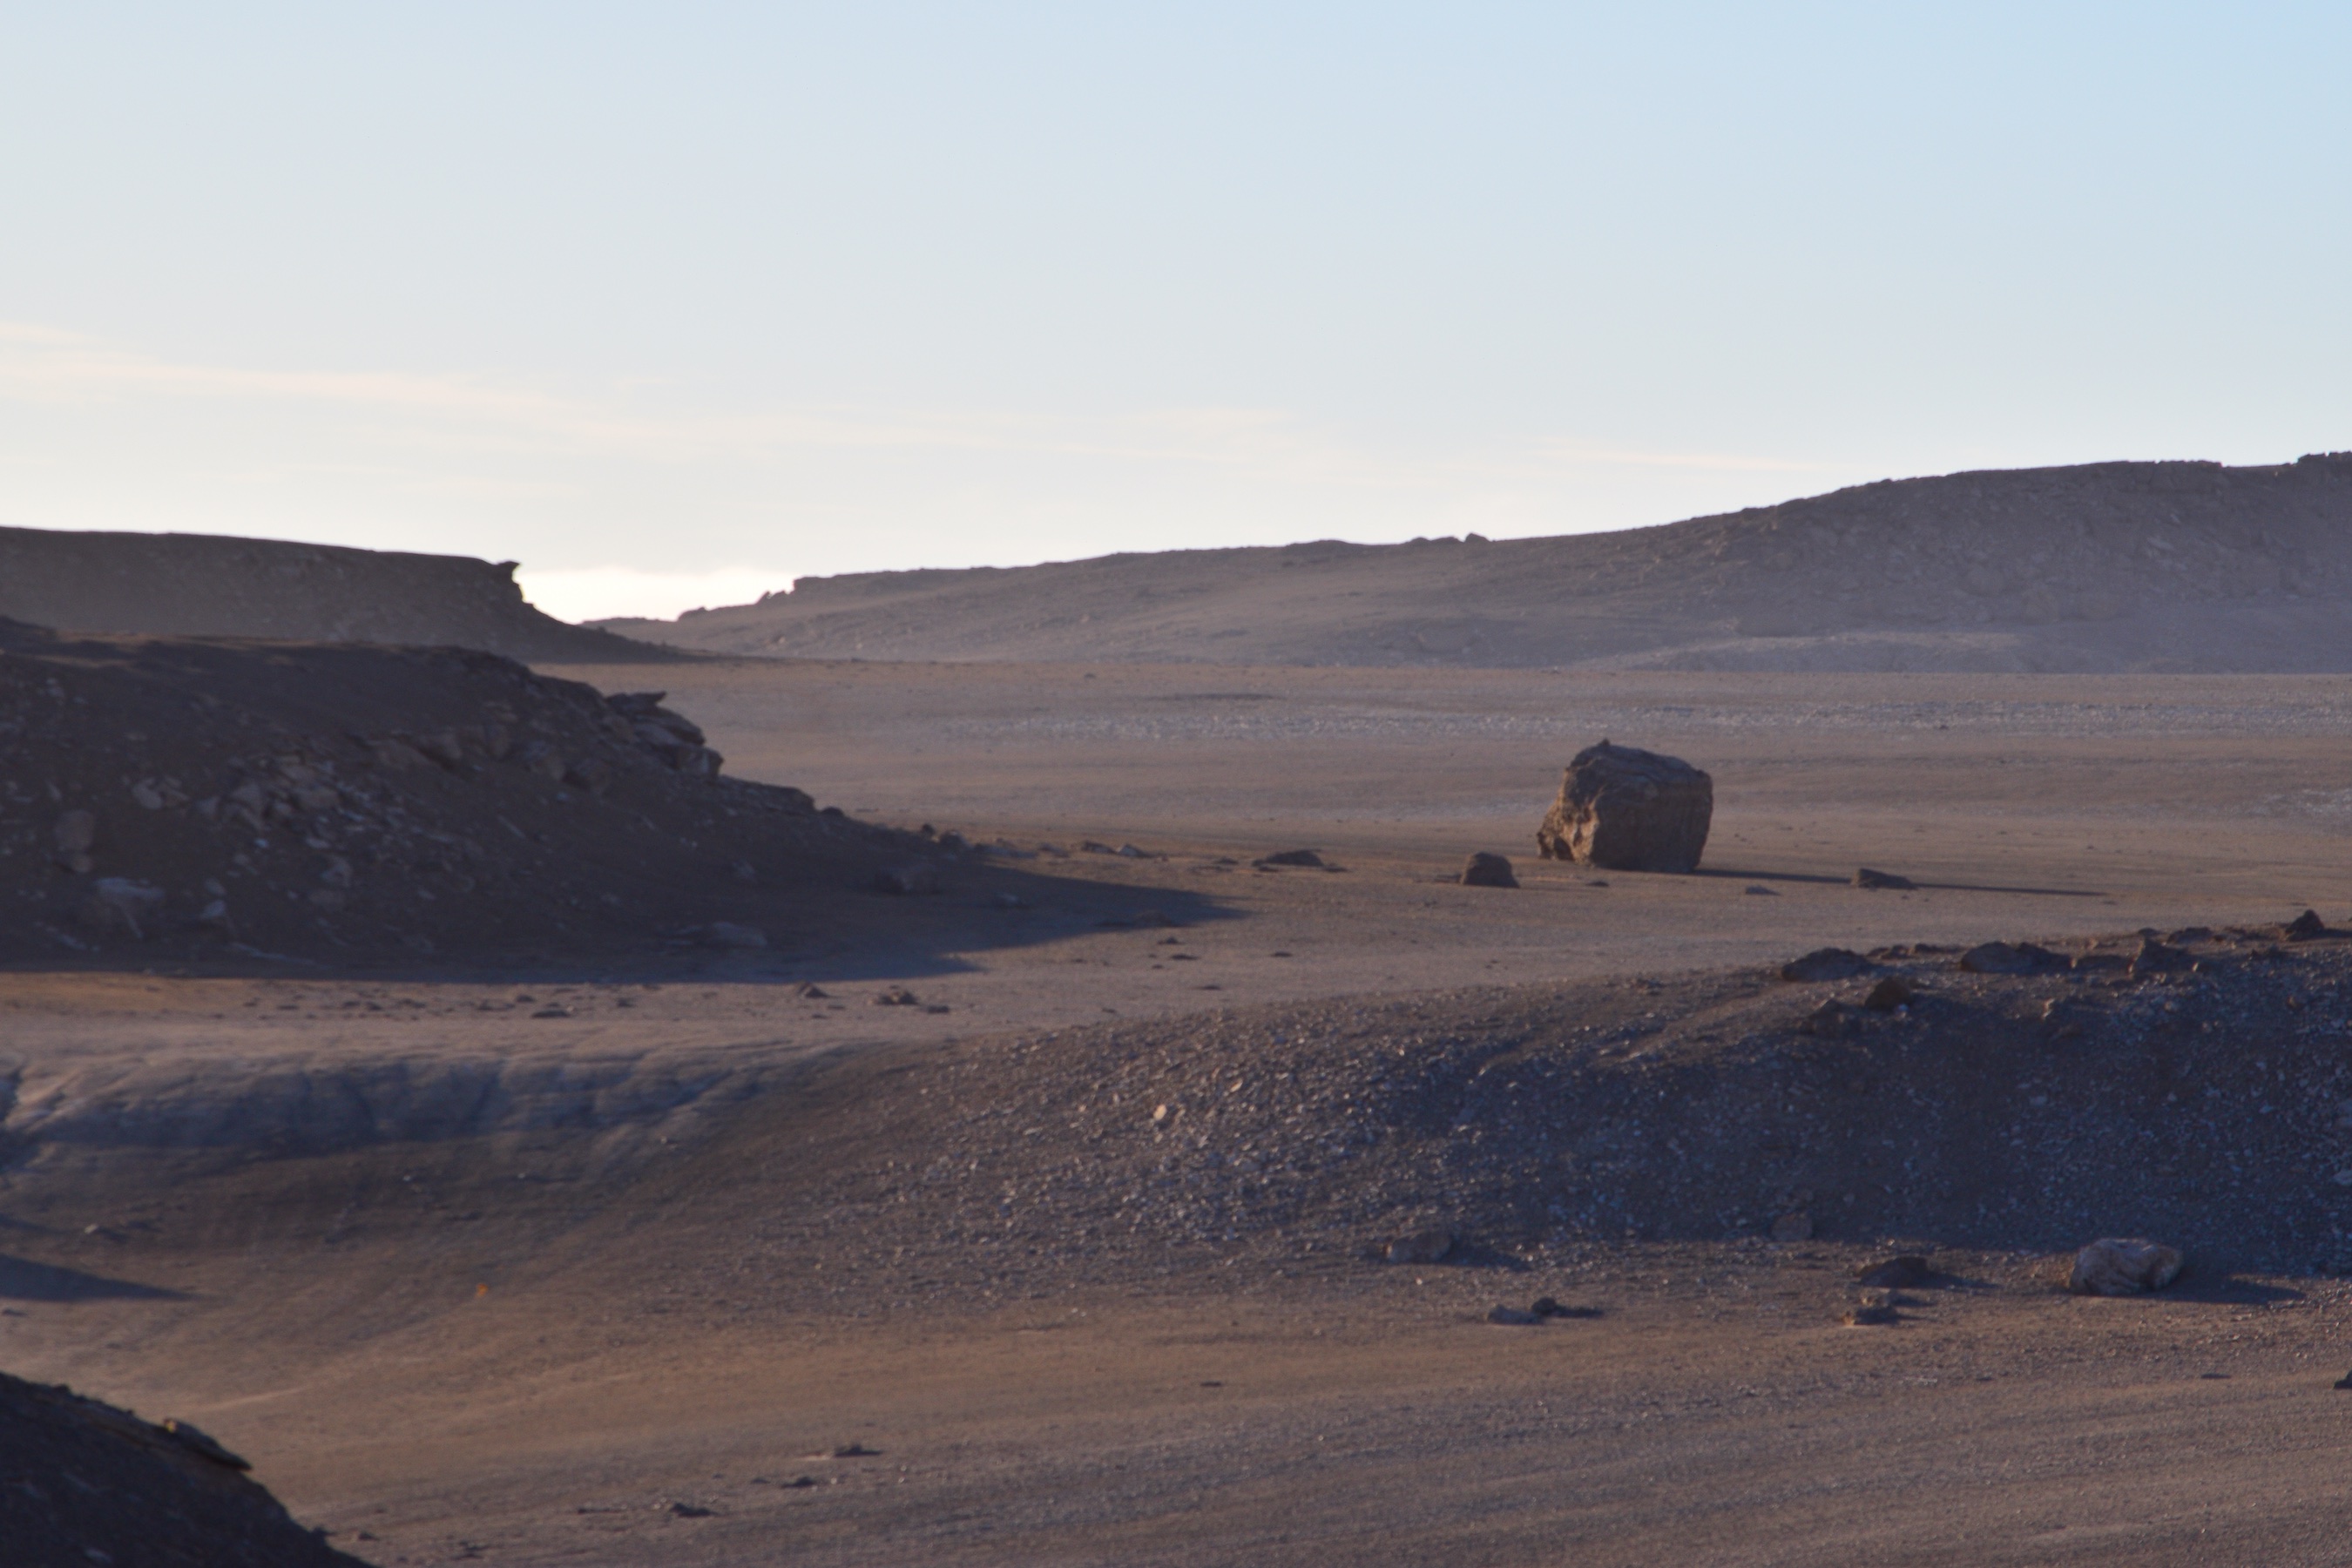 Von Braun Planitia, the grit-filled, windswept plain next to the Haughton-Mars Project base.